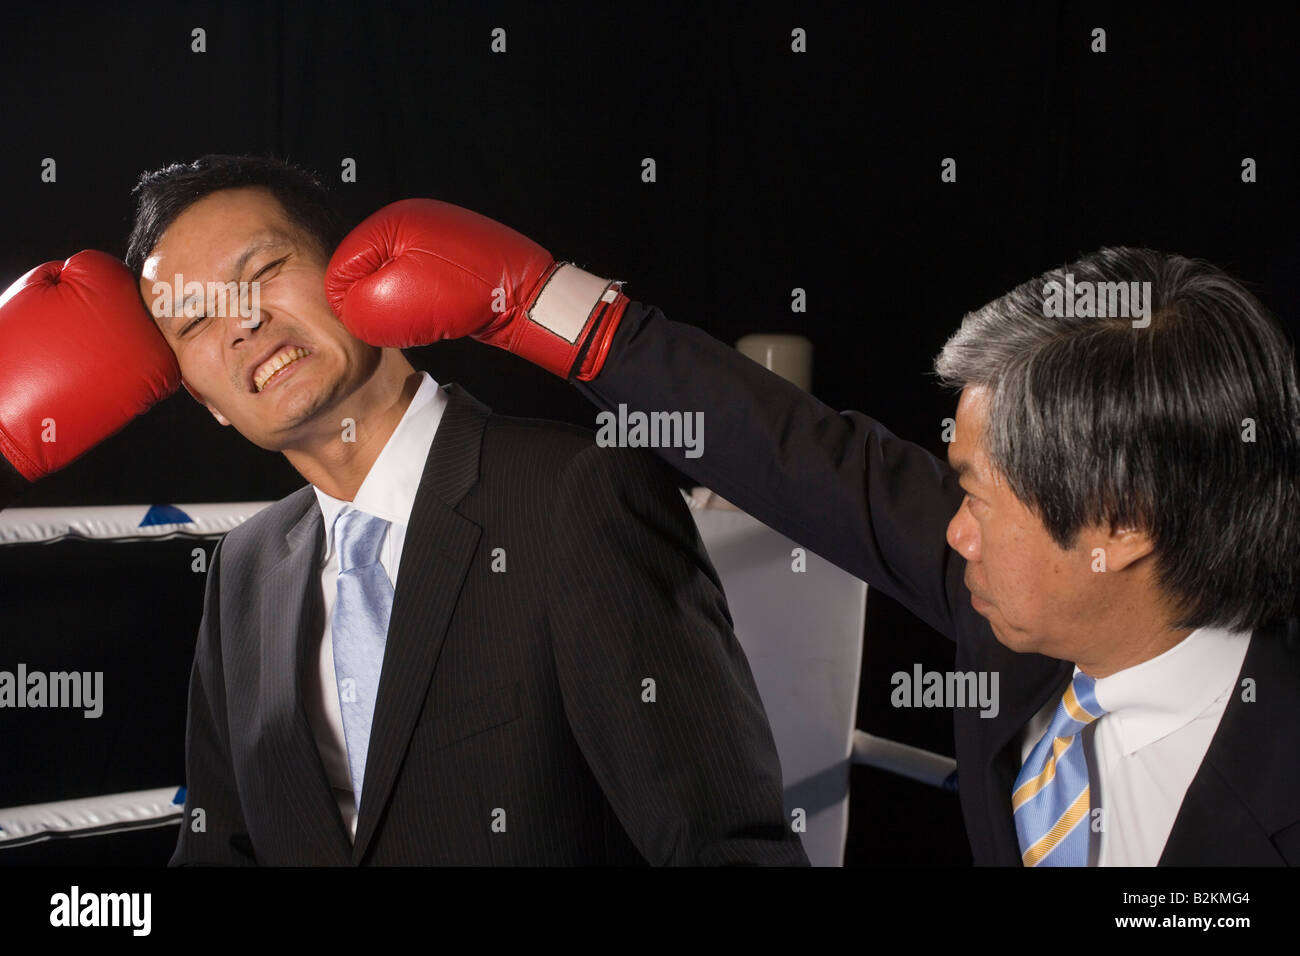 Businessman being hit by his two opponents in a boxing ring Stock Photo